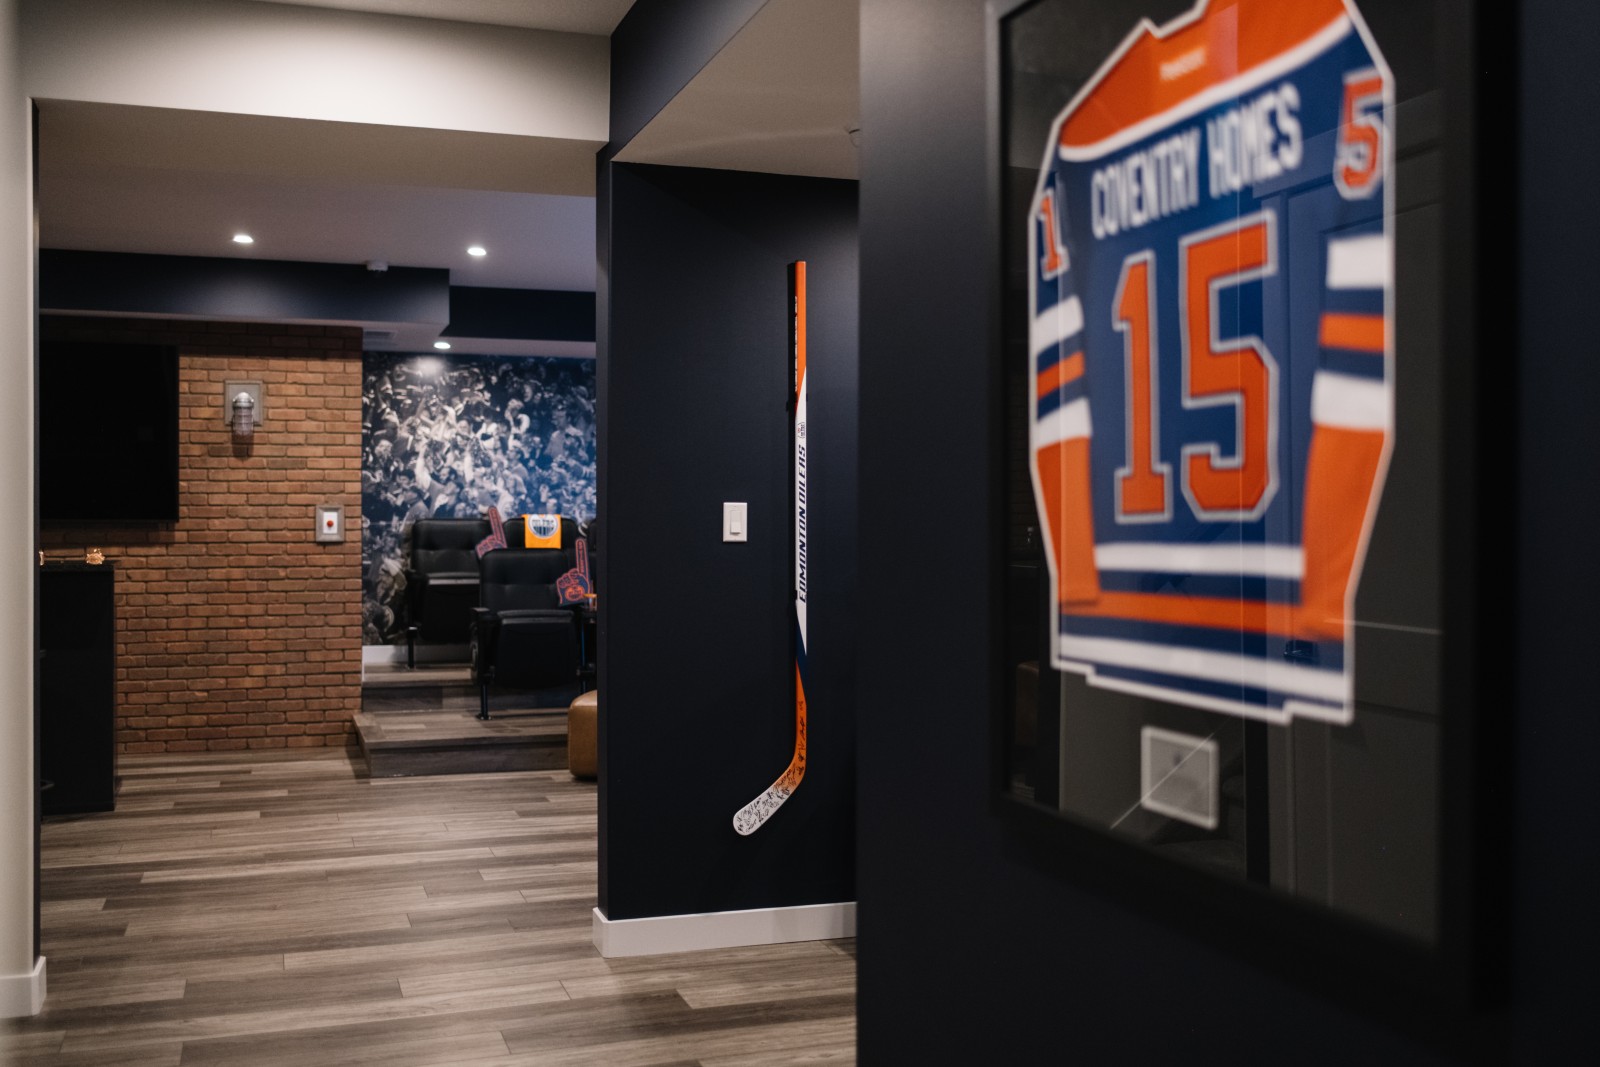 Oilers Fan Cave in the basement of the Nysa showhome. A framed Oilers Jersey is hanging on a dark blue wall. Behind you can see a tv hanging on a brick wall and stadium seats in front of a mural of a crowd of people